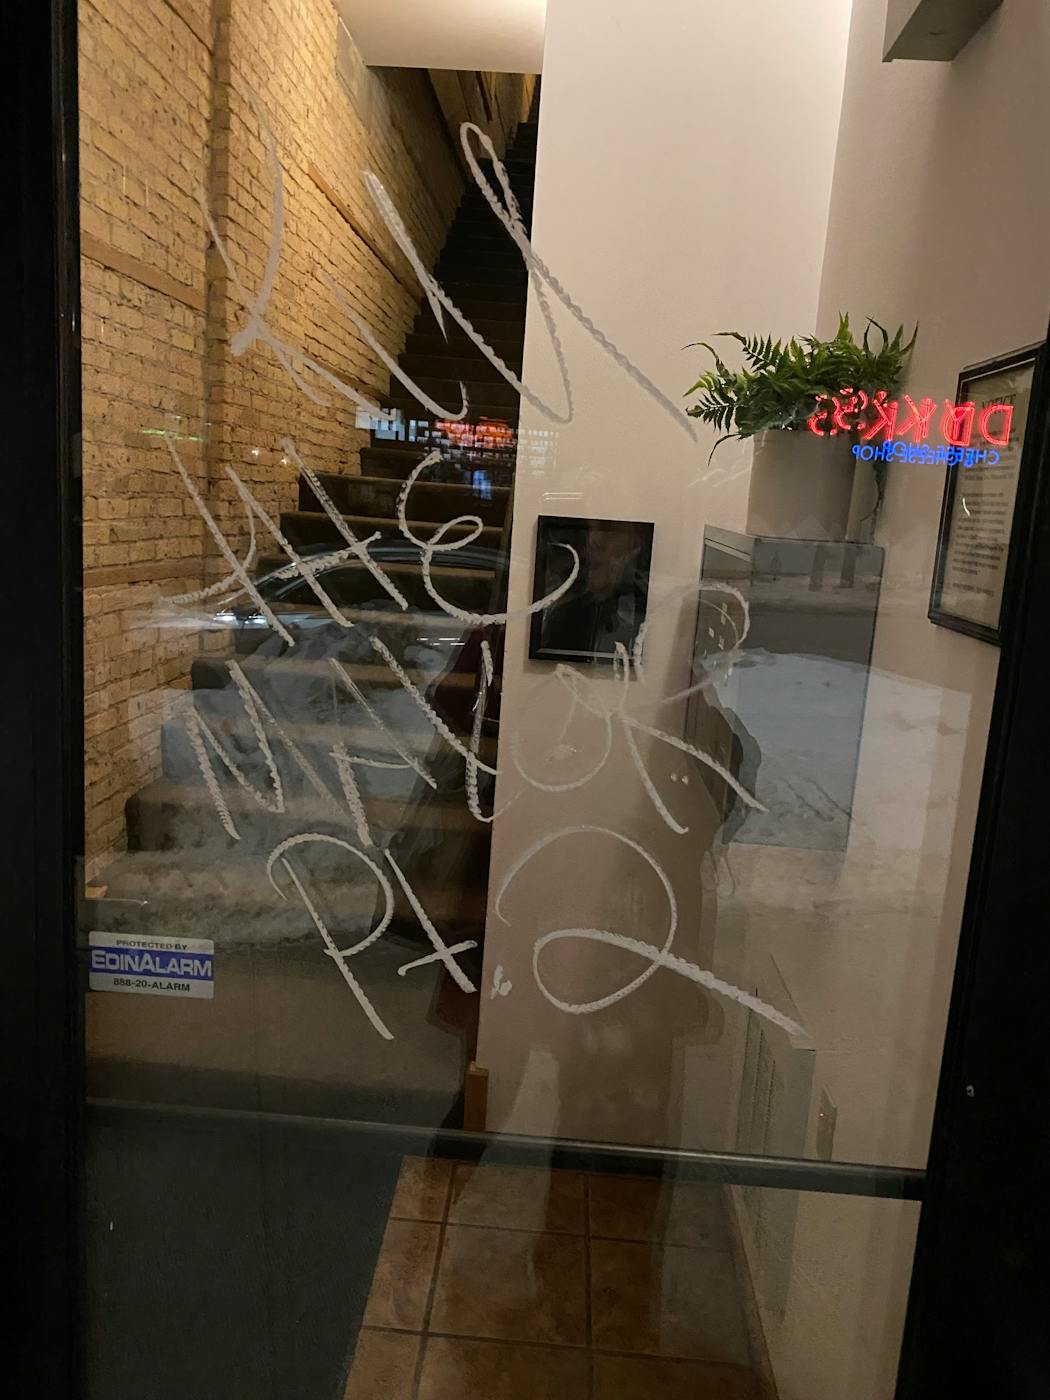 The front door of the building where Minneapolis Mayor Jacob Frey lives was painted with the words, “Kill the mayor, Pt. 2,” in late January 2023. The “part 2” is presumably a reference to a nearly identical vandalism on the same door that was removed weeks before. 